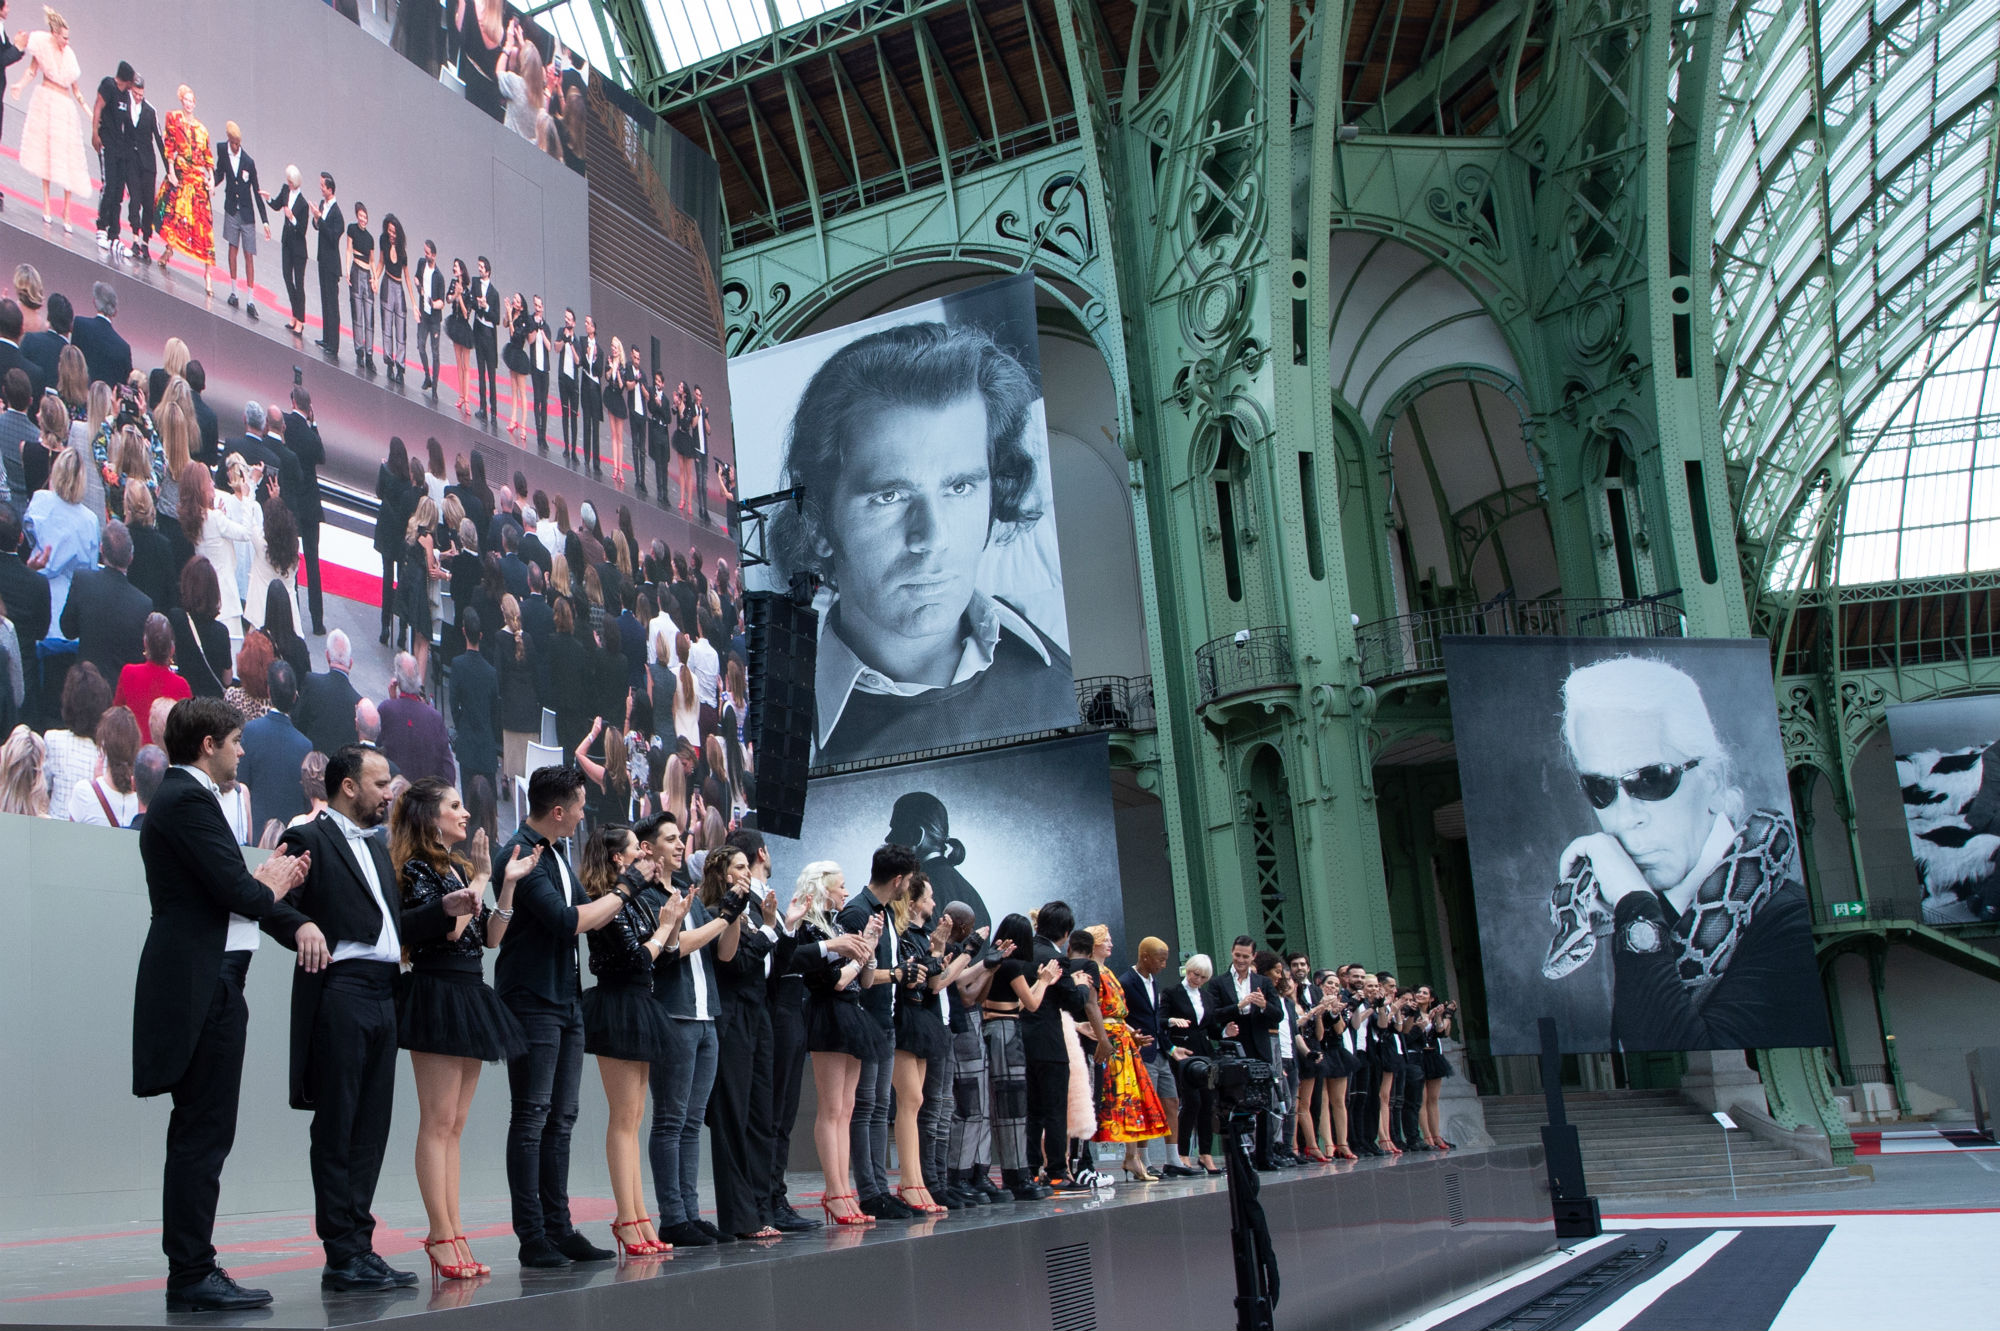 Karl Lagerfeld will be honored in this temporary Paris exhibition